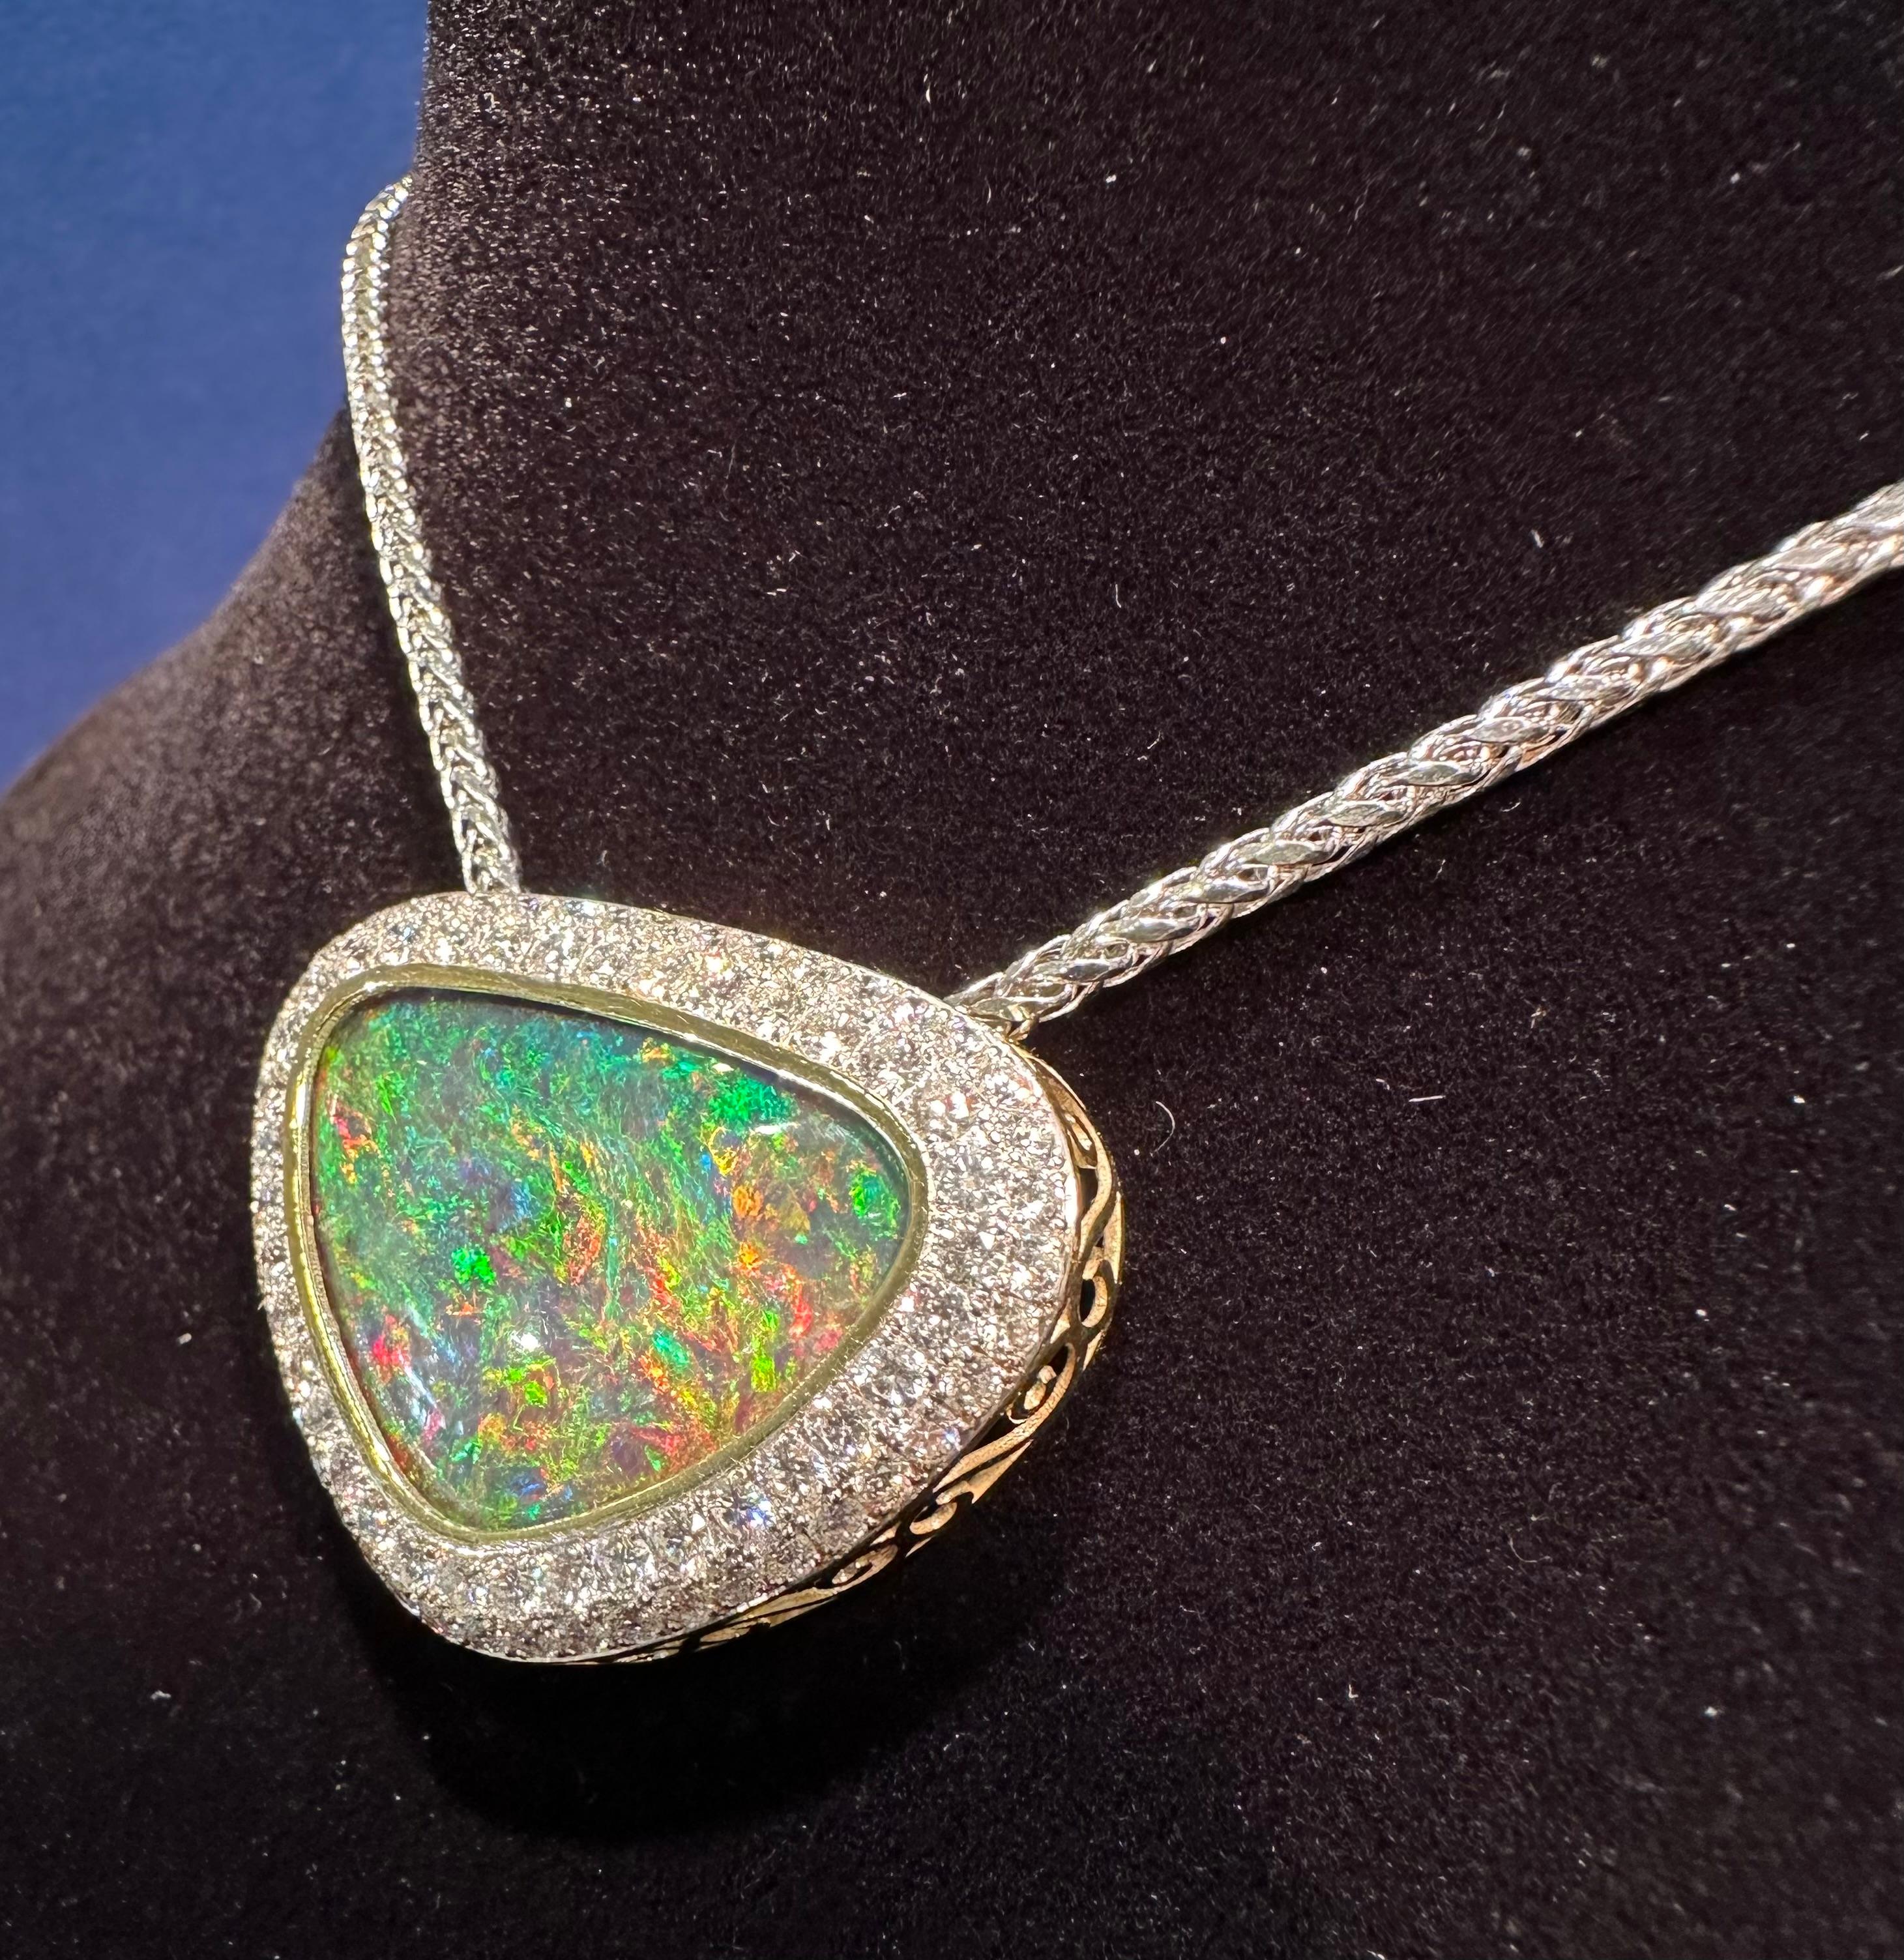 Huge Rare 45.44 Carat Black on Red Australian Opal and Diamond Pendant Necklace In Excellent Condition For Sale In Tustin, CA